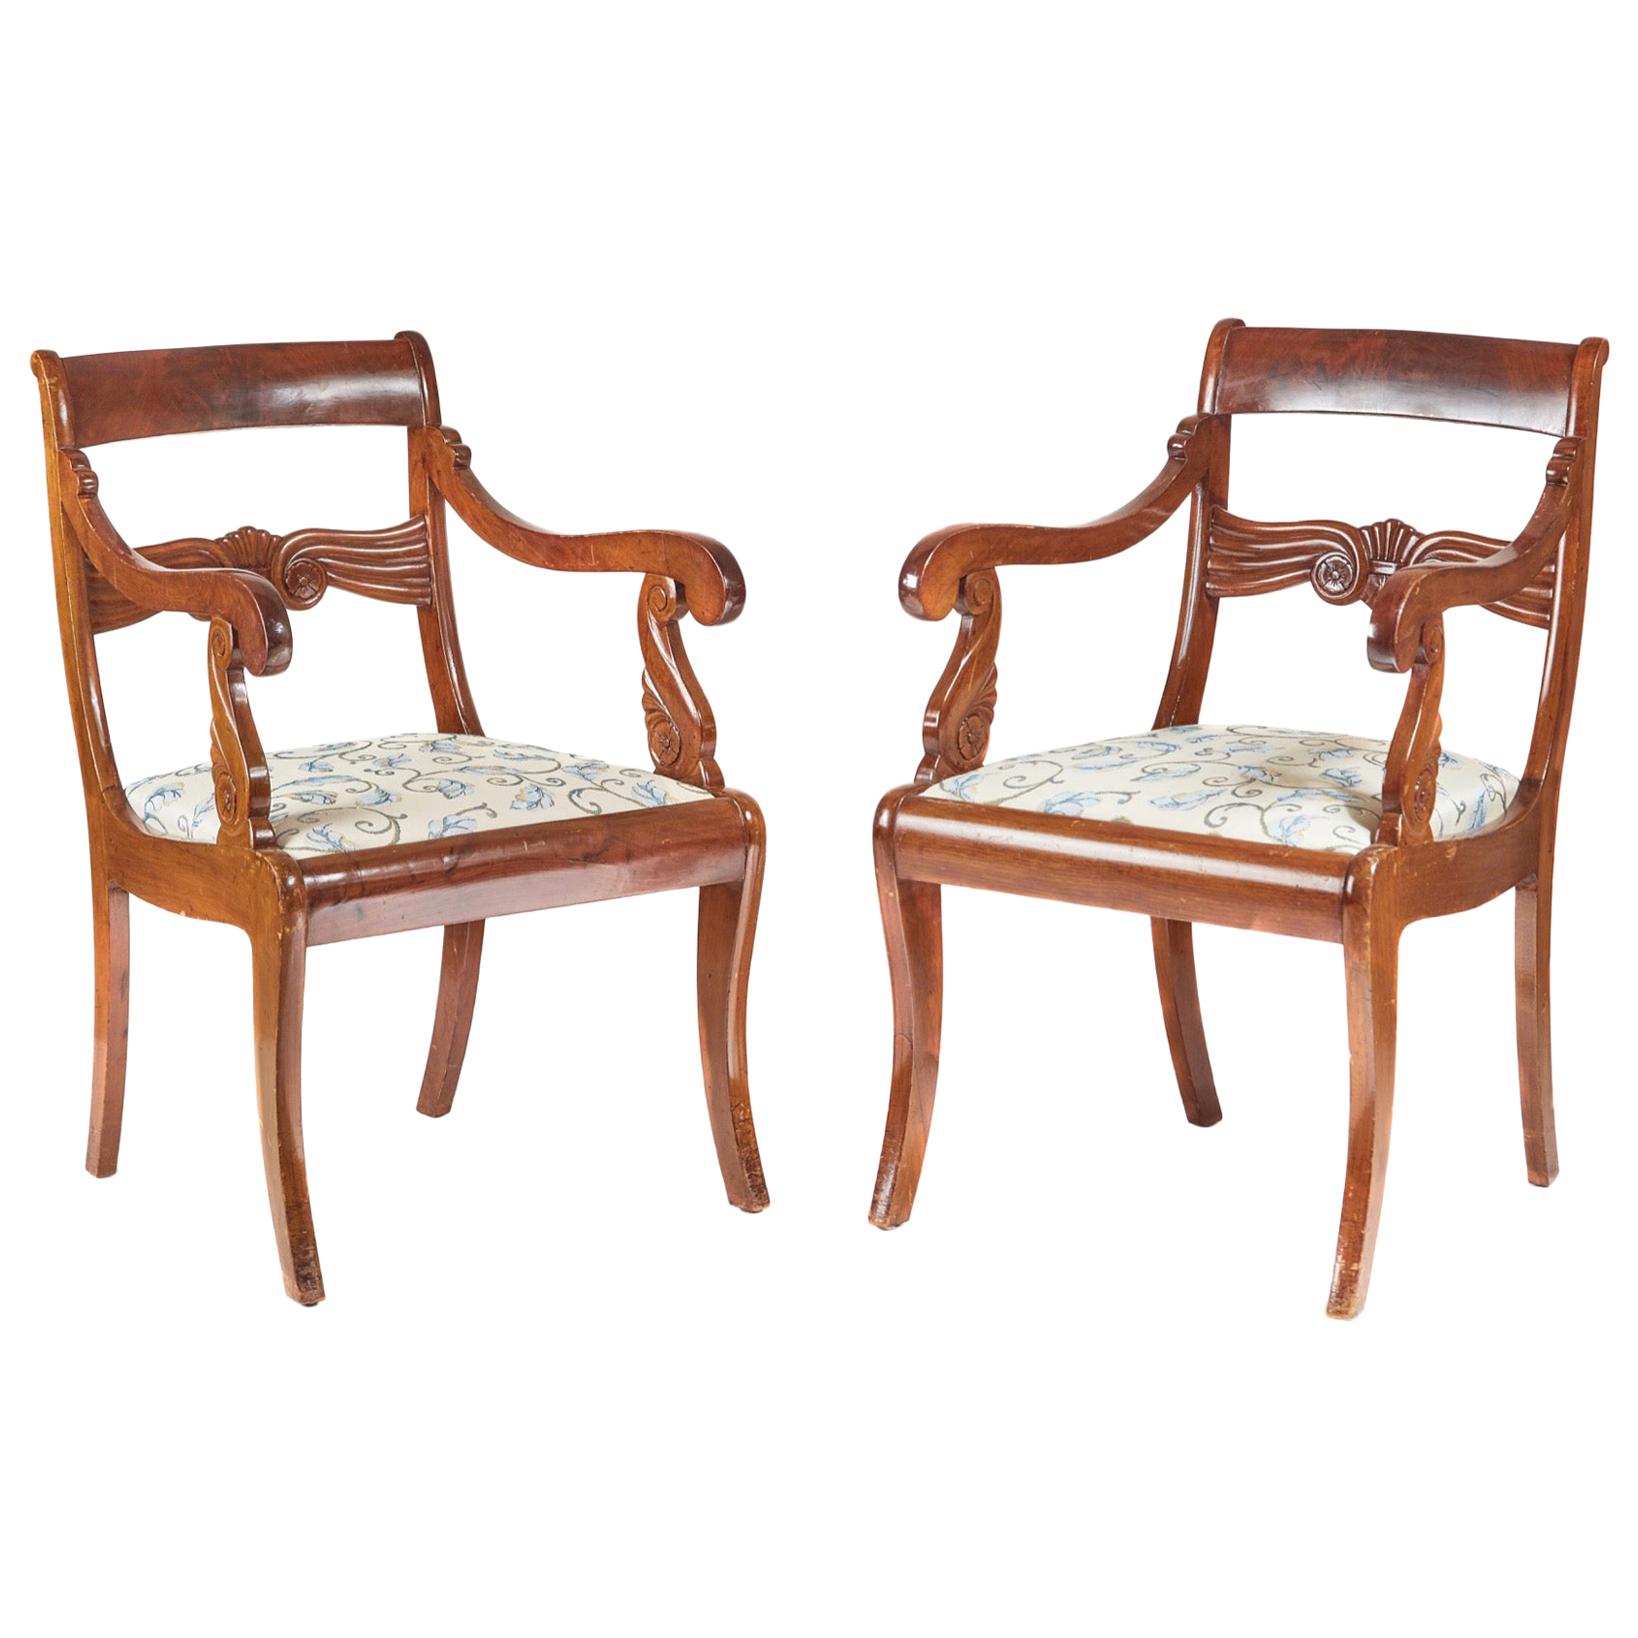 Antique Pair of French Mahogany Carver Chairs, circa 1880